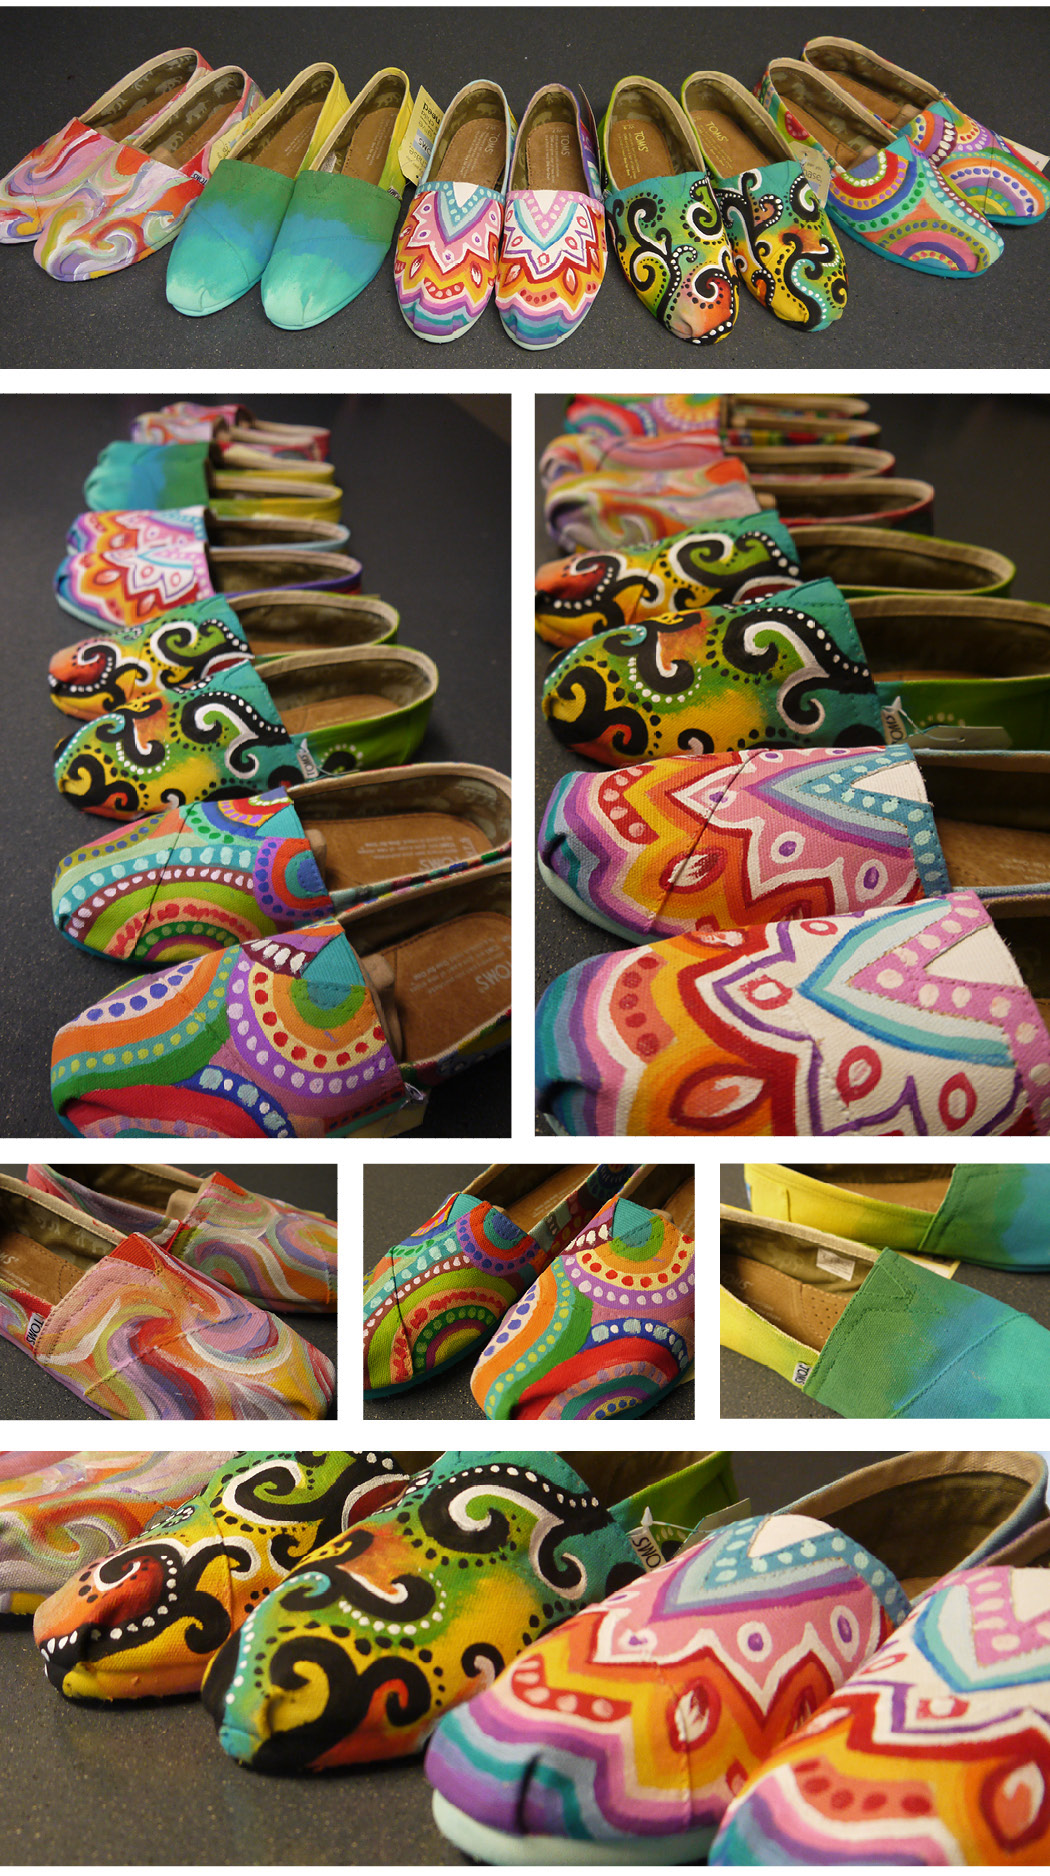 marcela Marcela Caraballo TOMS TOMS Shoes shoe shoe design shoe painting Painting Design colorful bright graphic Swirls Painted Toms painted shoes